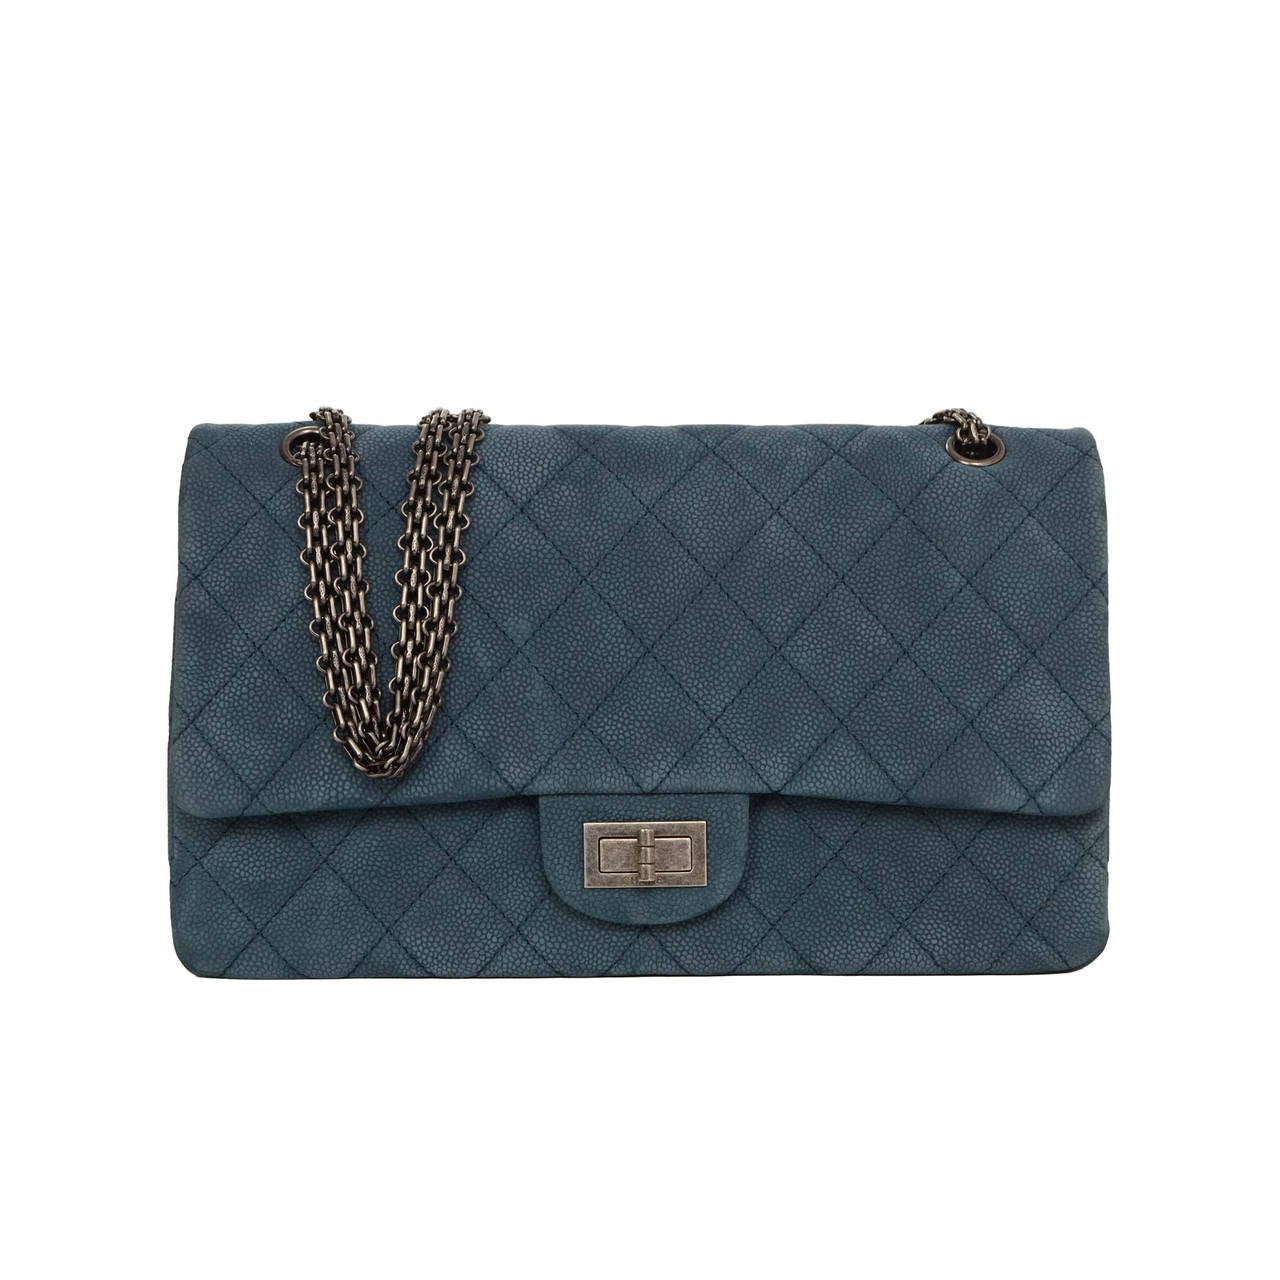 CHANEL Iridescent Blue Quilted Caviar 2.55 Re-Issue 227 Double Flap Bag SHW